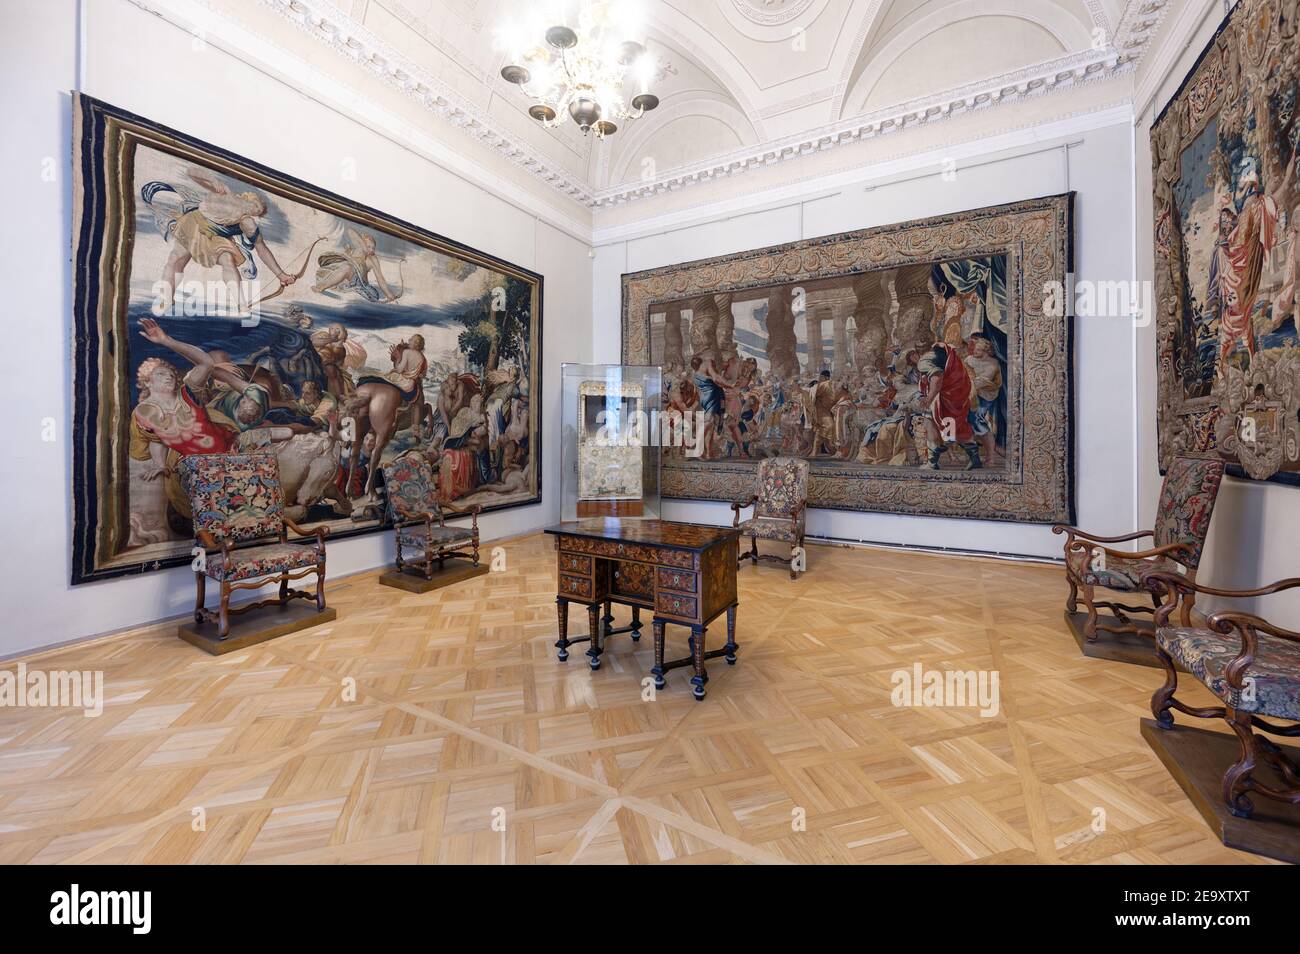 Three tapestries from Parisian manufactories made in the first half of 17th century exhibited in the State Hermitage museum, St. Petersburg, Russia Stock Photo